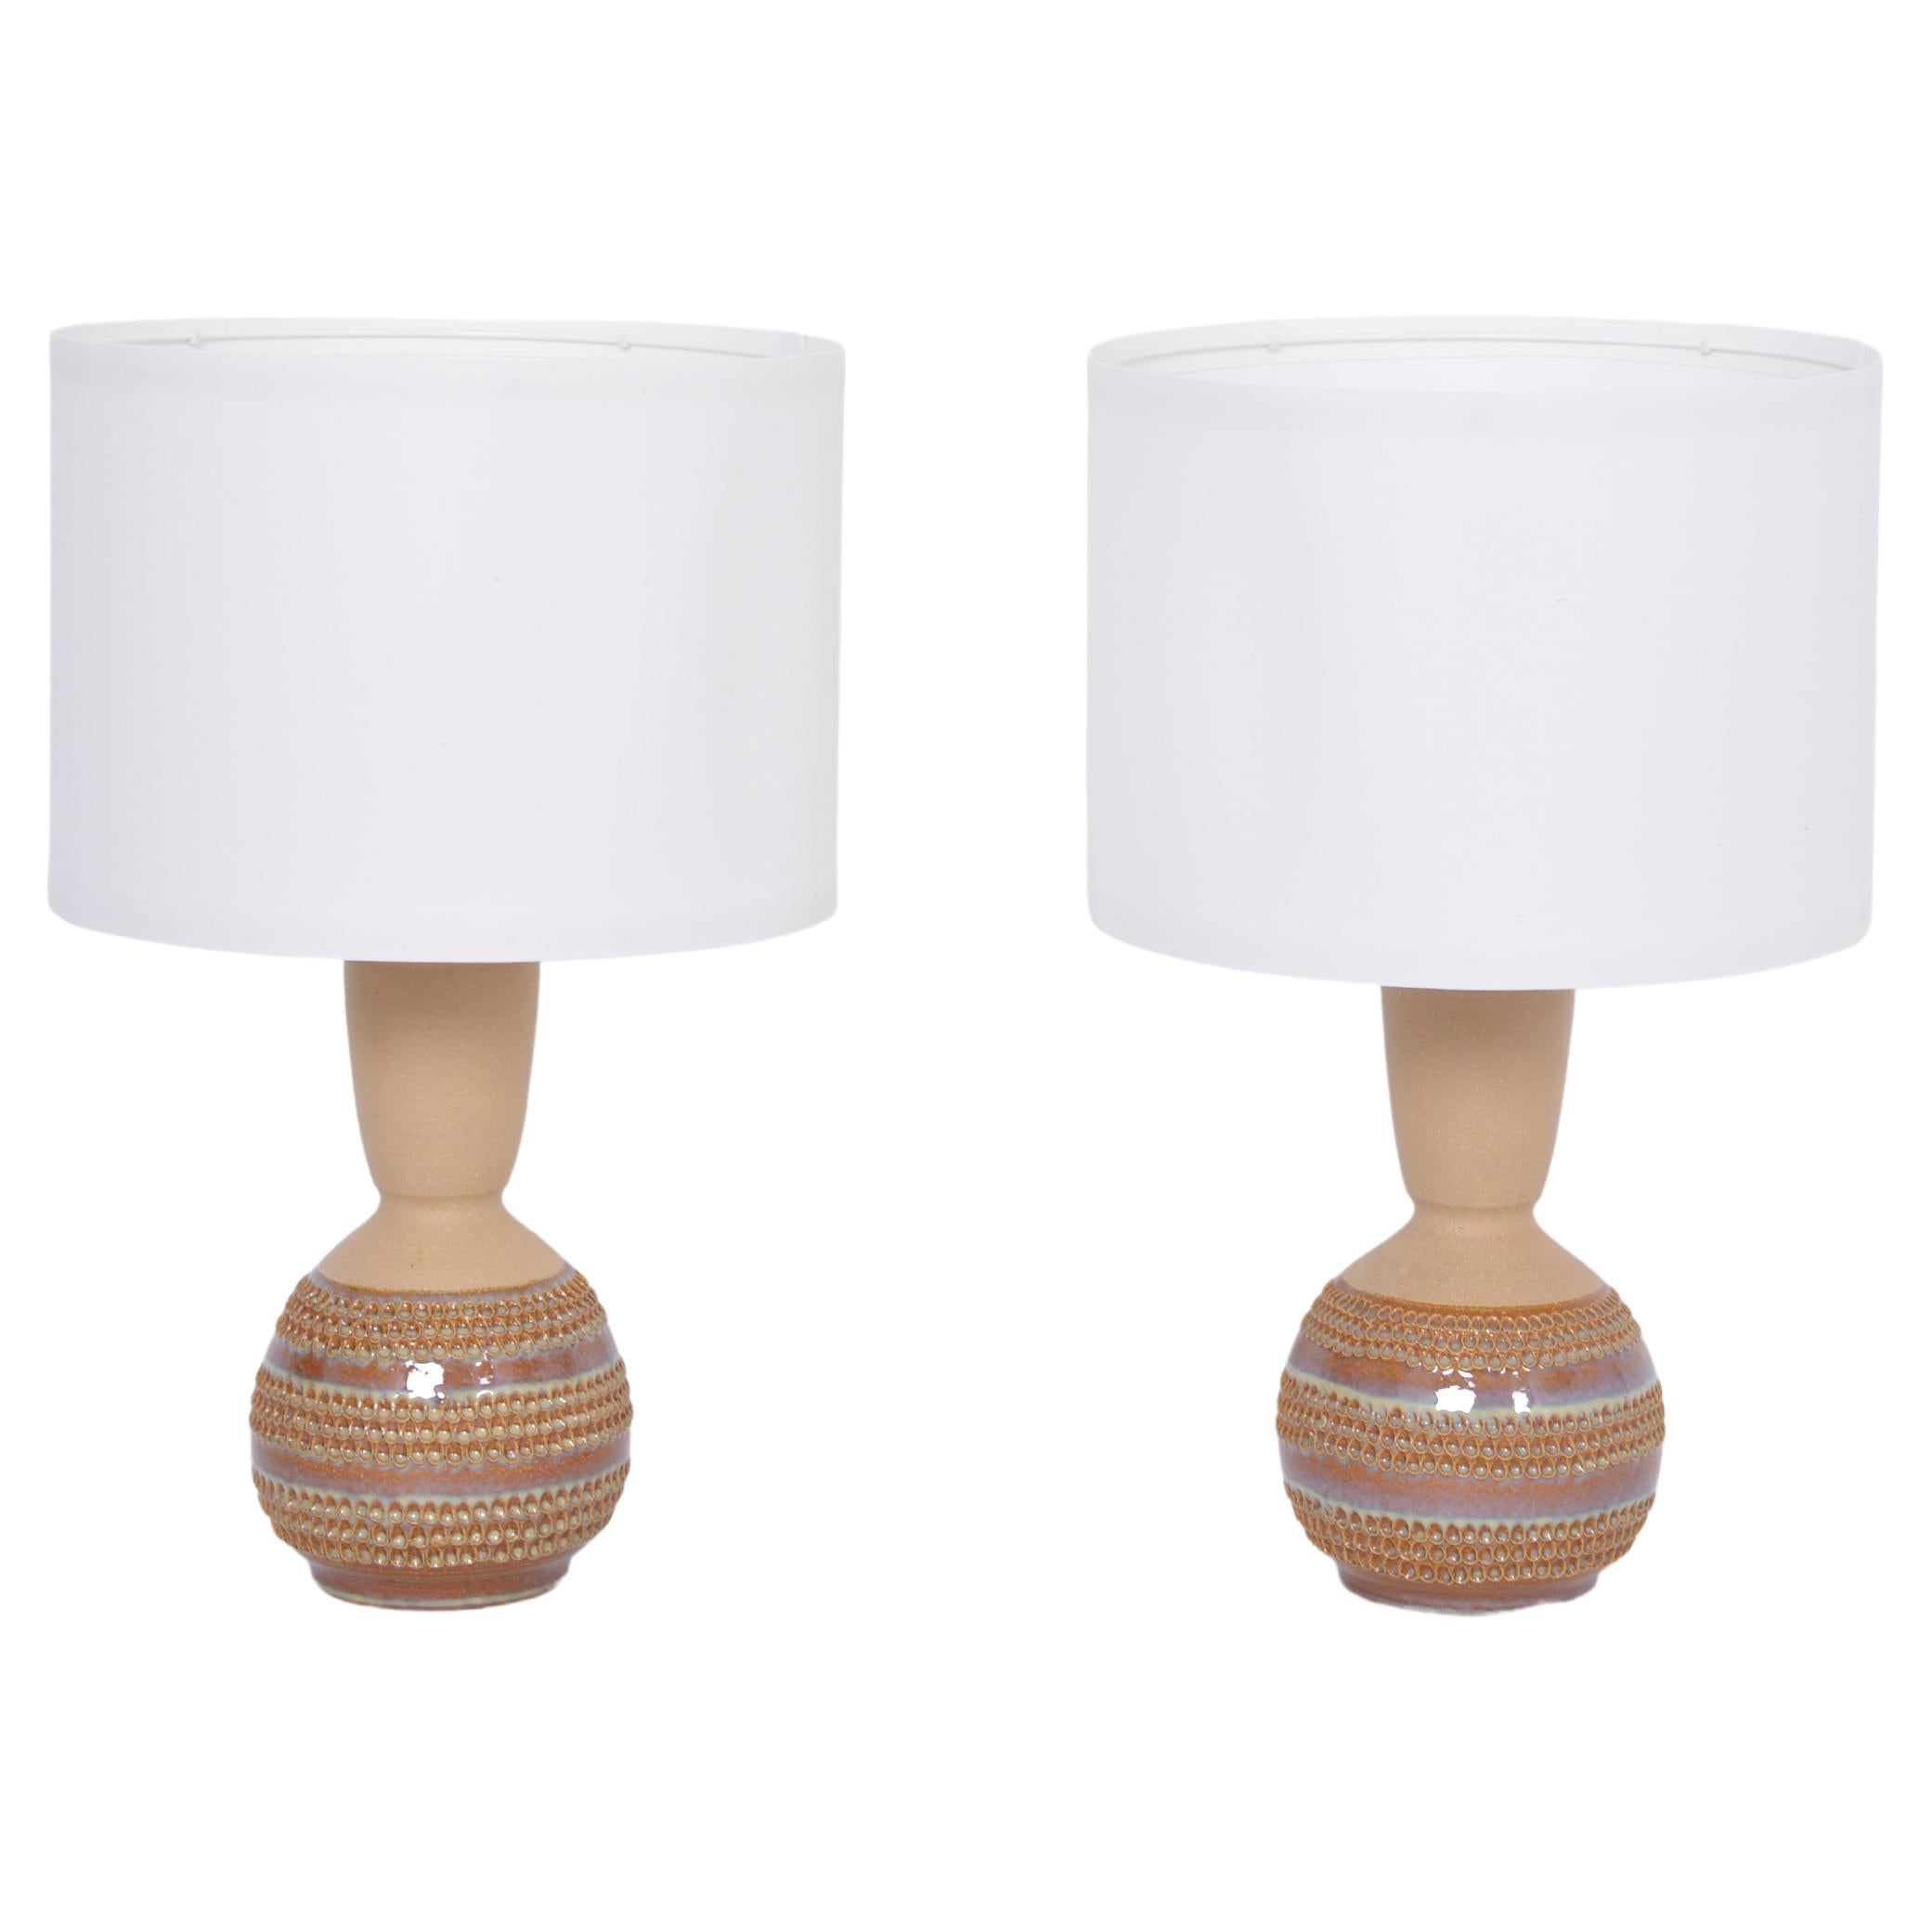 Pair of Danish Mid-Century Modern Ceramic Table Lamps Model 3038 by Soholm For Sale